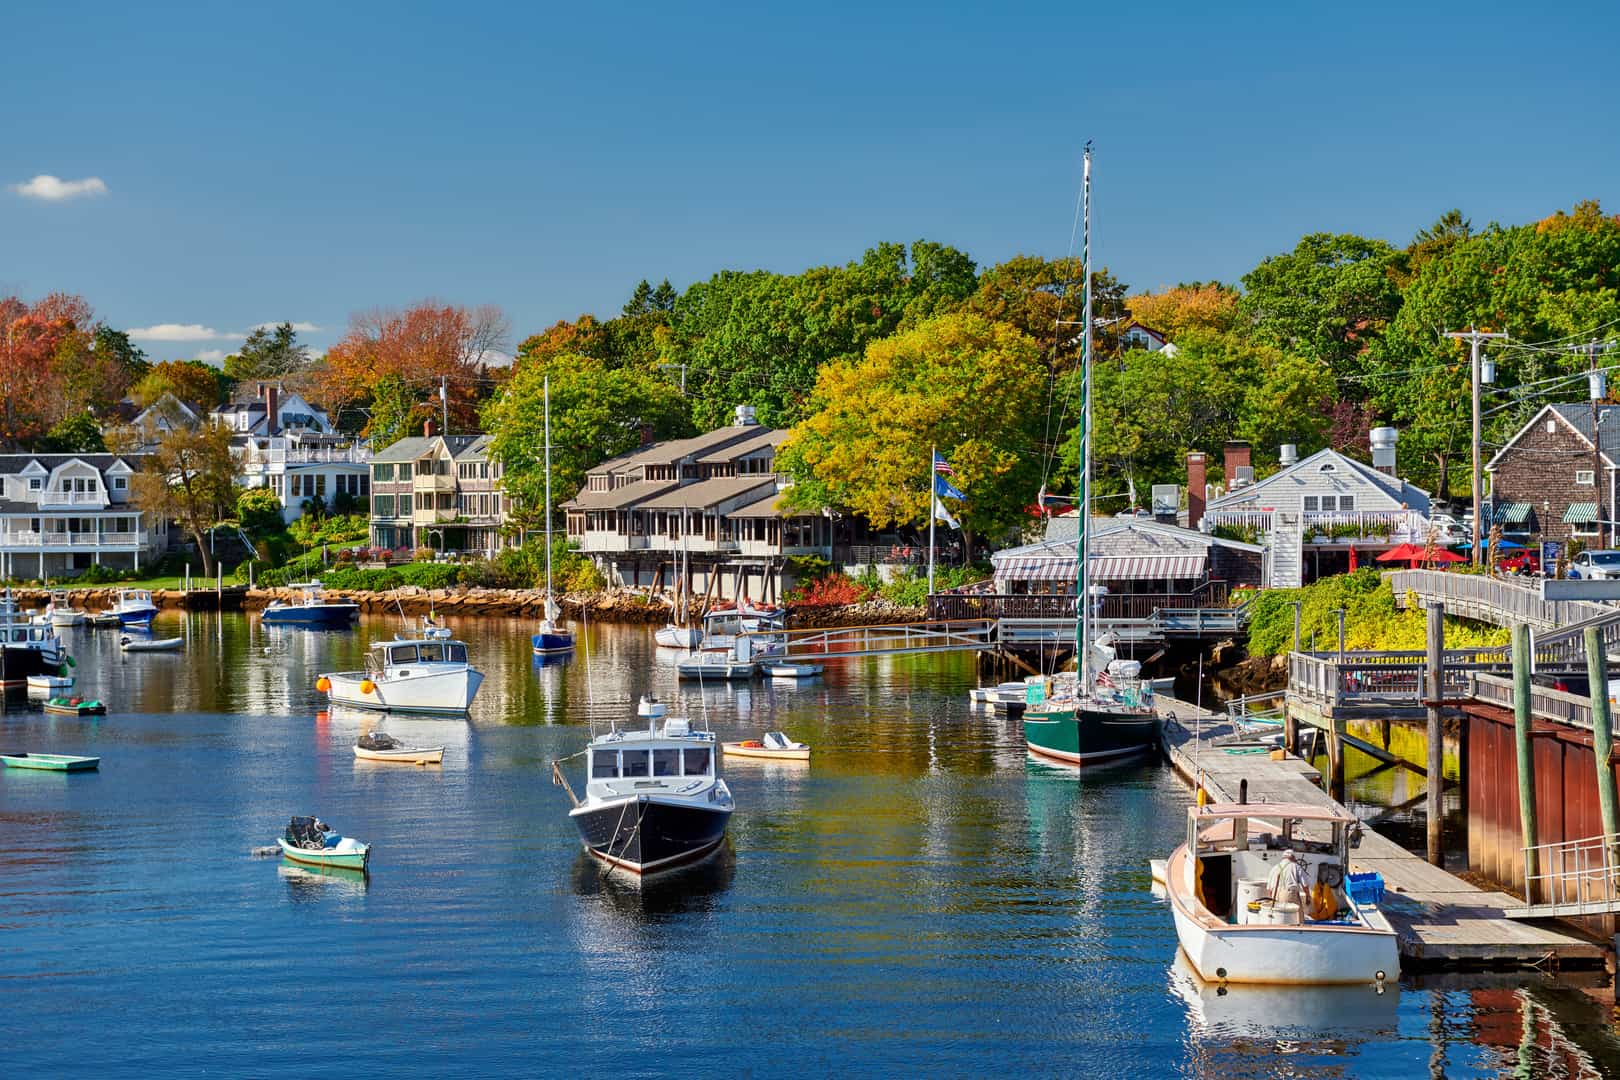 Boats in Perkins Cove